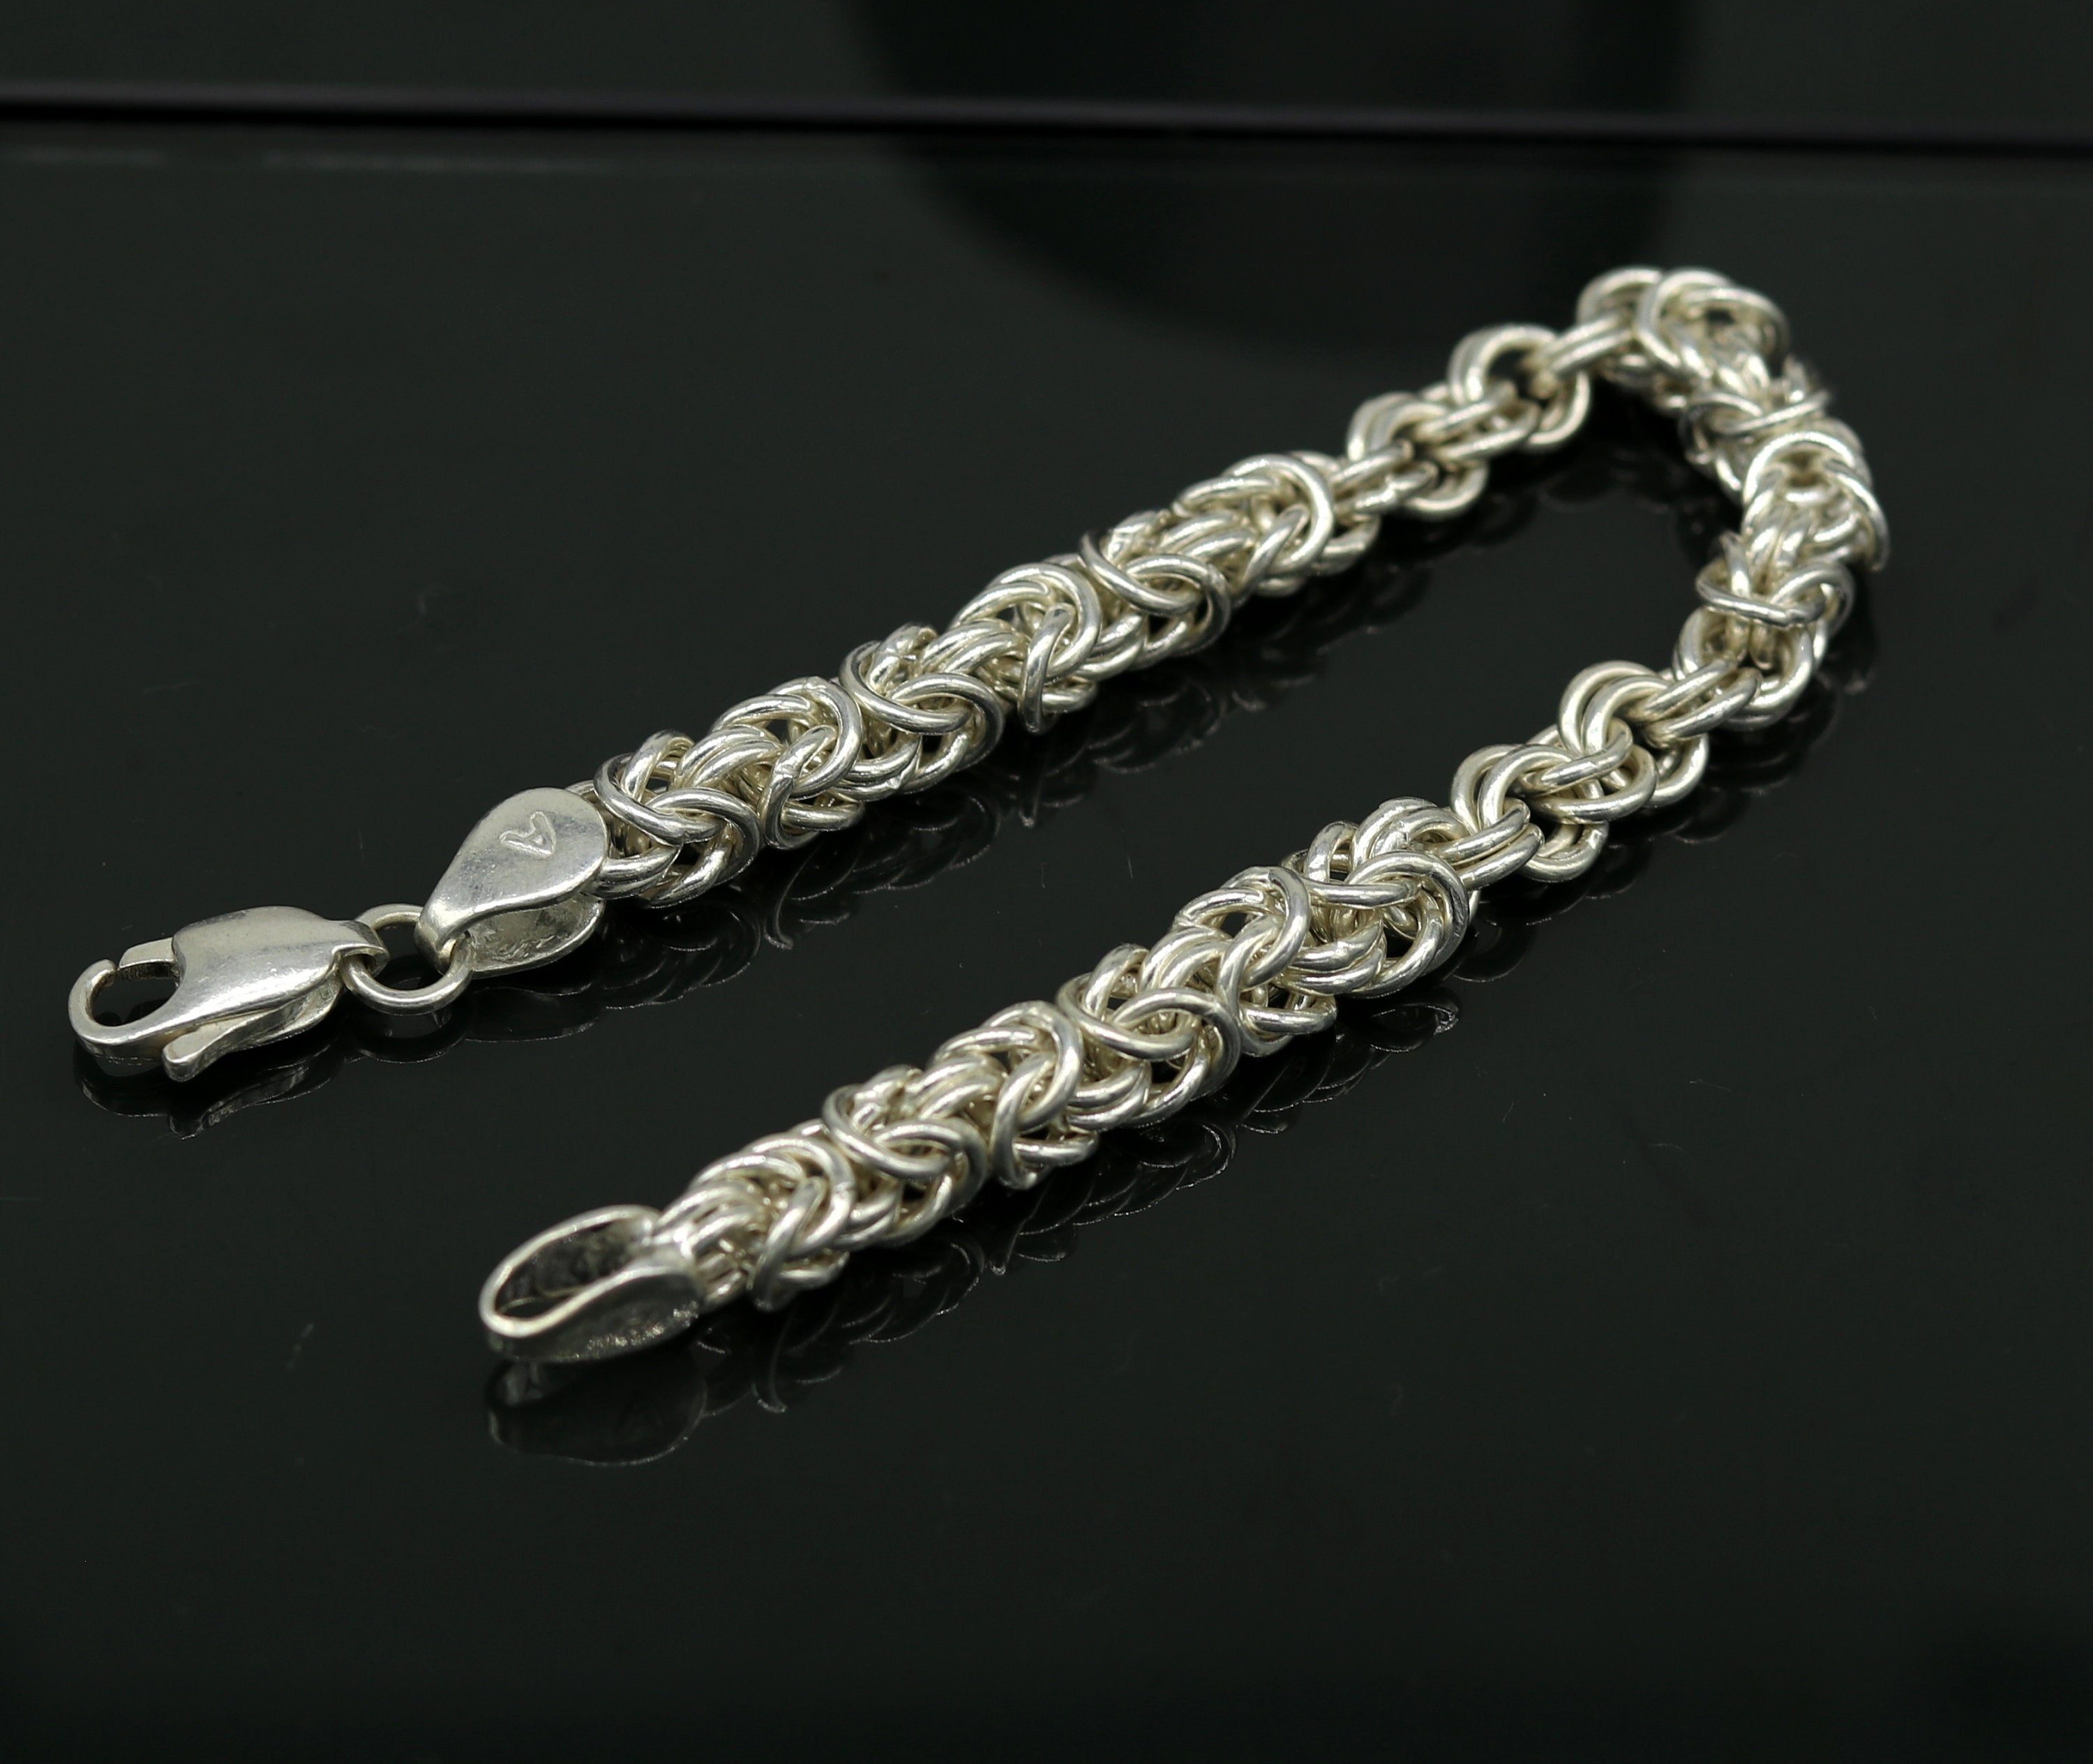 9 inches 925 sterling silver handmade stylish byzantine chain bracelet  customized design gorgeous personalized gifting jewelry sbr195  TRIBAL  ORNAMENTS